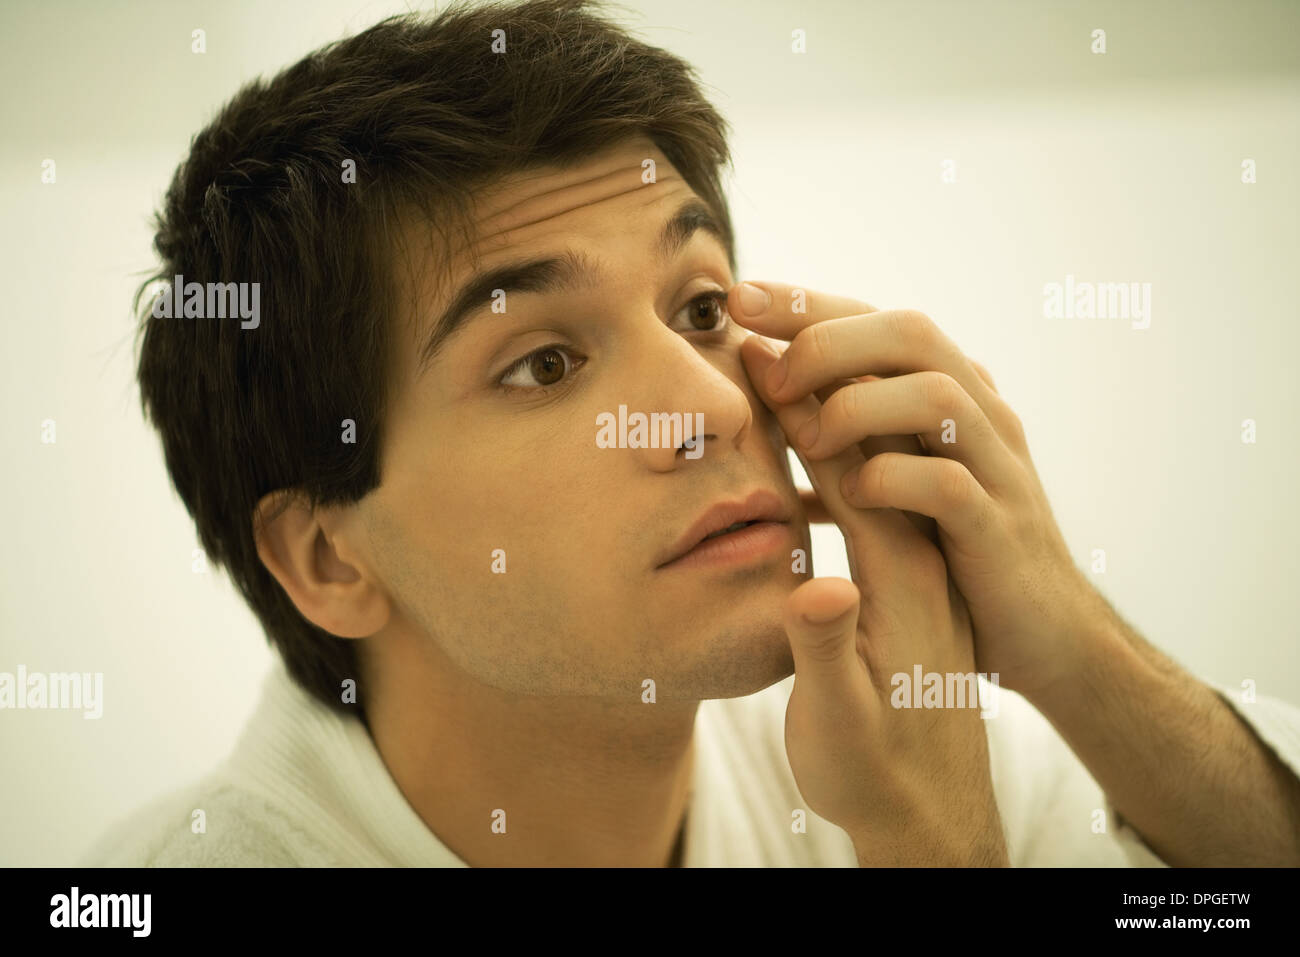 Man putting in contact lens, close-up Stock Photo